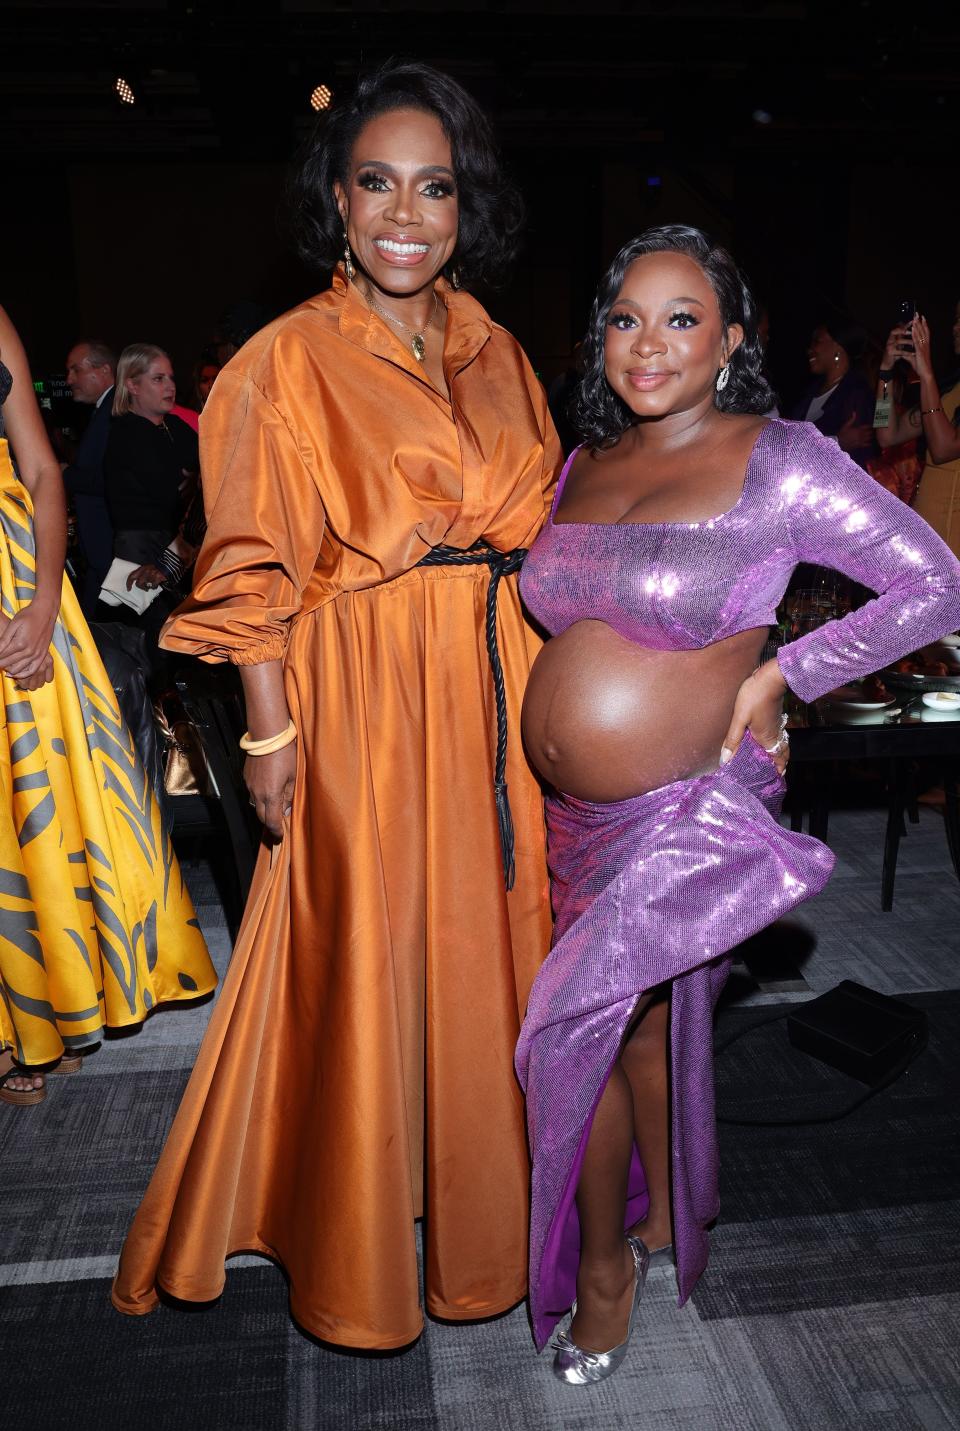 LOS ANGELES, CALIFORNIA – MARCH 09: (L-R) Sheryl Lee Ralph and Naturi Naughton attend the 2023 ESSENCE Black Women In Hollywood Awards at Fairmont Century Plaza on March 09, 2023 in Los Angeles, California. (Photo by Arnold Turner/Getty Images for ESSENCE)